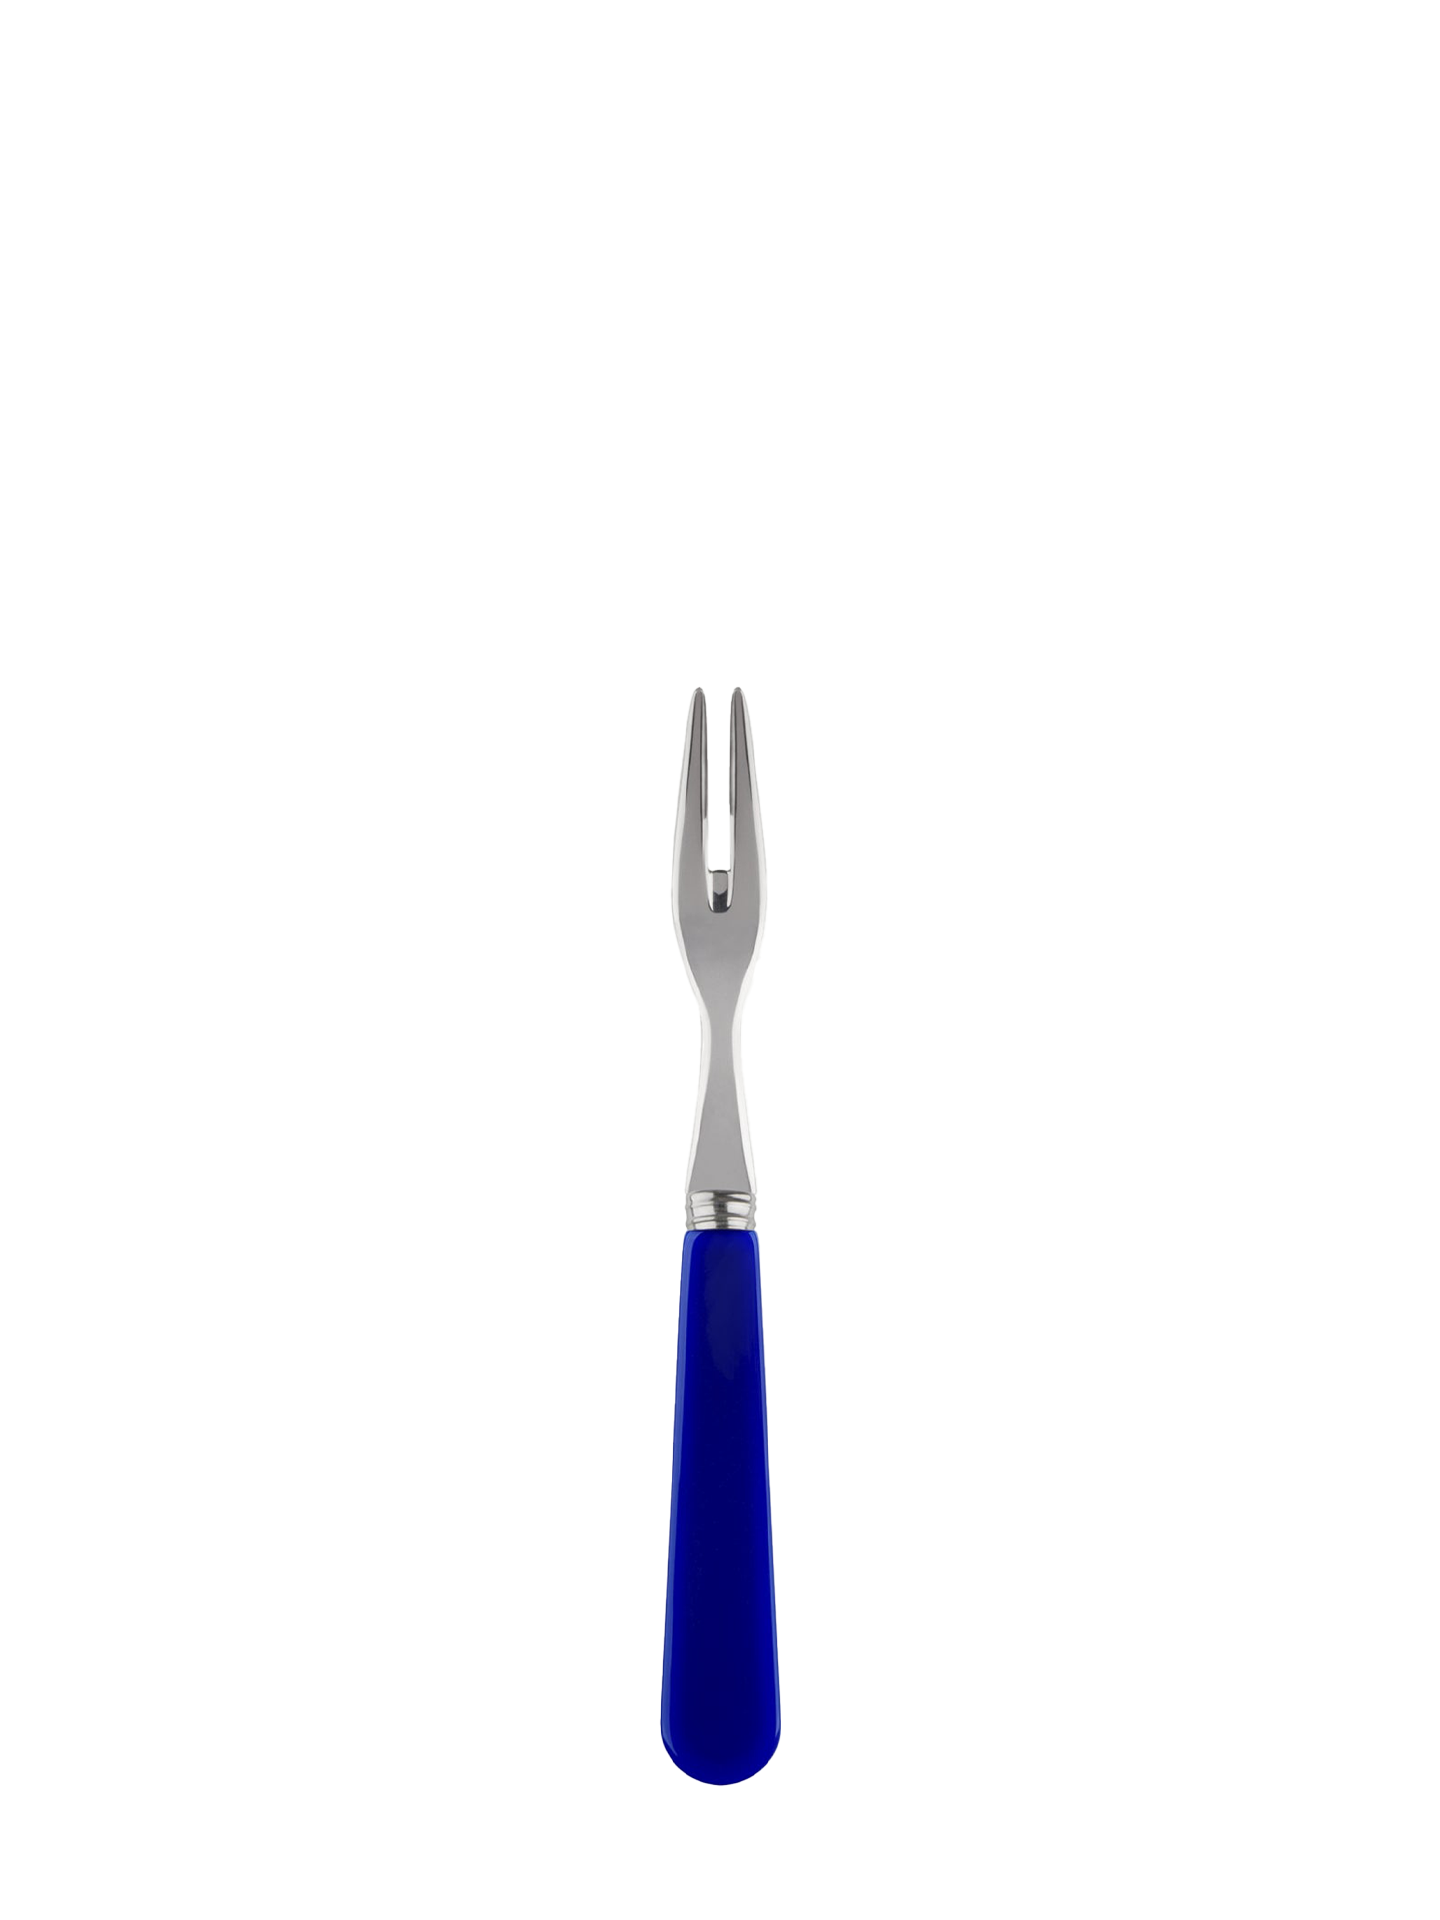 The lapis blue cocktail fork from the Duo series by Sabre Paris